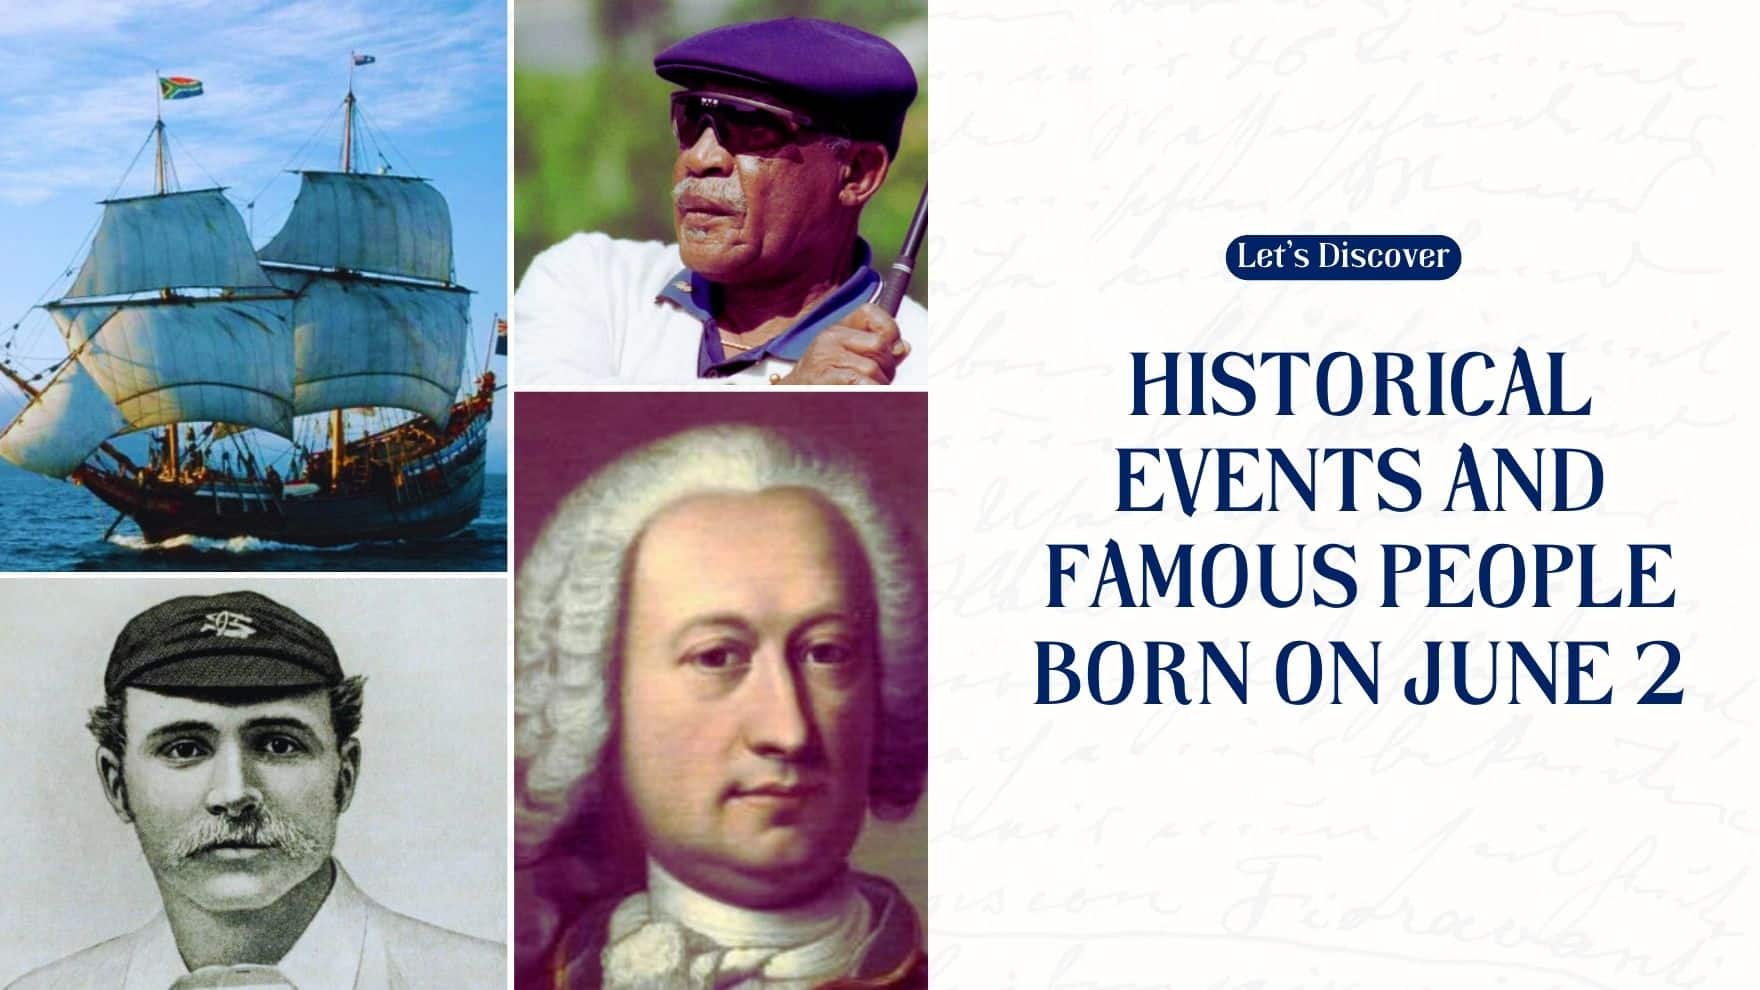 Historical Events and Famous People Born on June 2